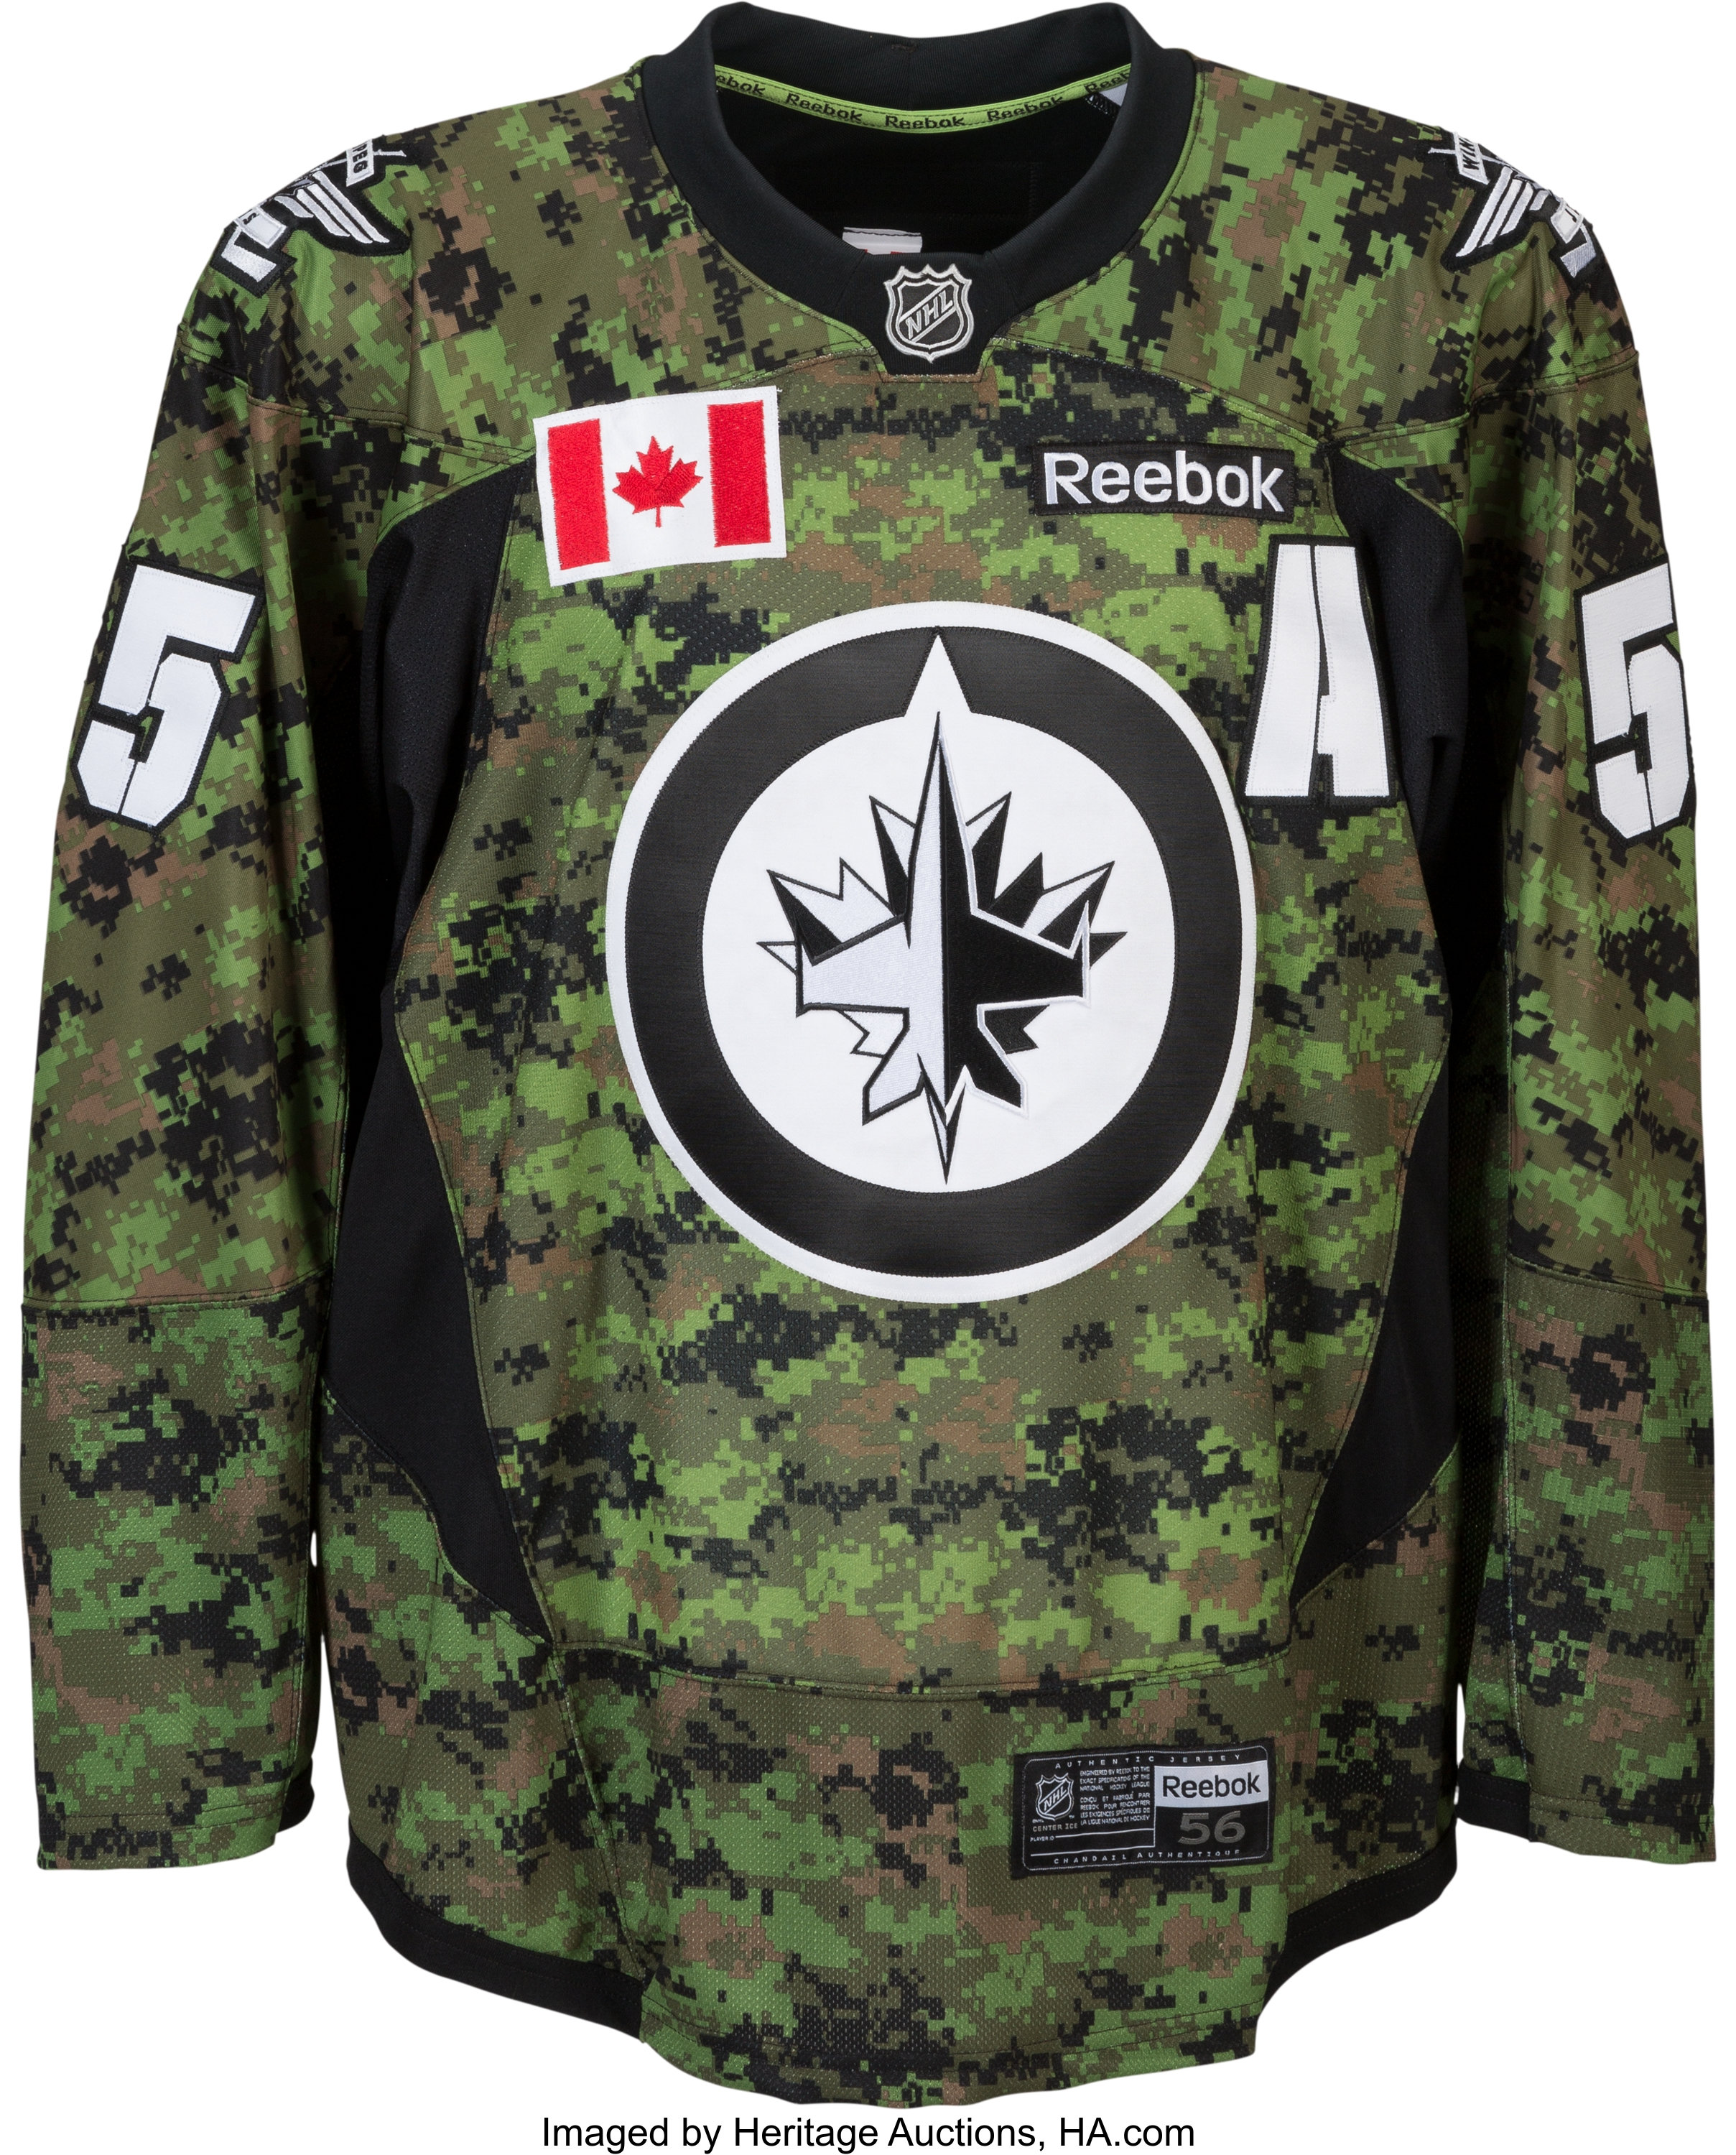 Winnipeg Jets unveil a new specialty jersey to be worn this season in  honour of the Royal Canadian Air Force centennial celebration